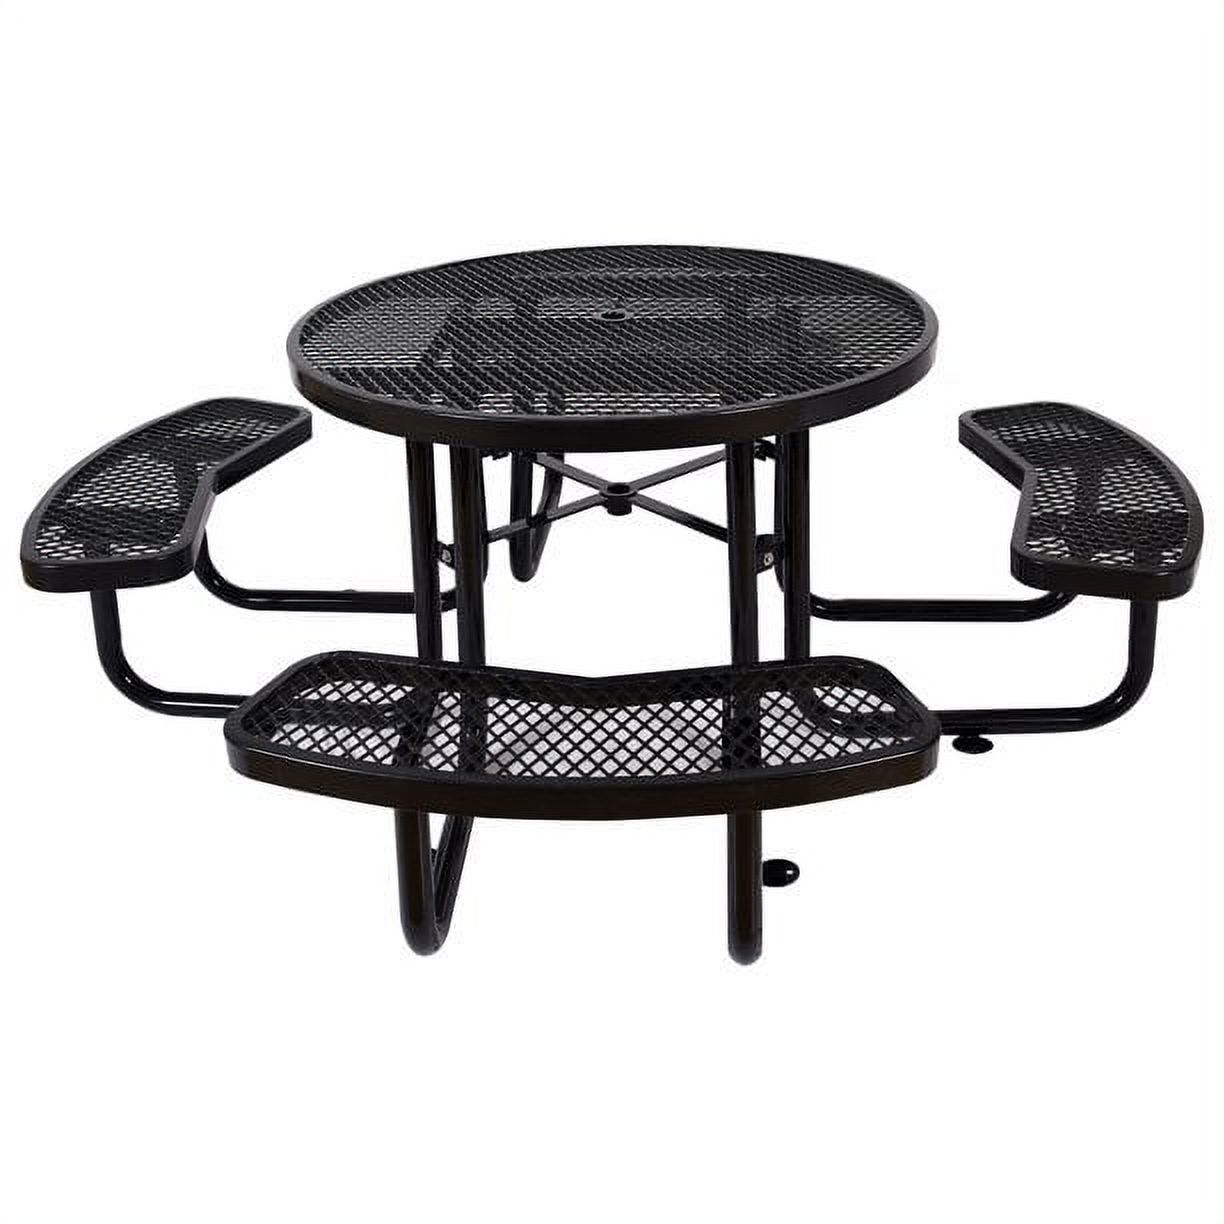 46" Steel Round Picnic Table, Expanded, Industrial Metal Outdoor Table Large Camping Picnic Tables for Backyard Poolside Dining Party Garden Patio Lawn Deck (Black) - image 1 of 7